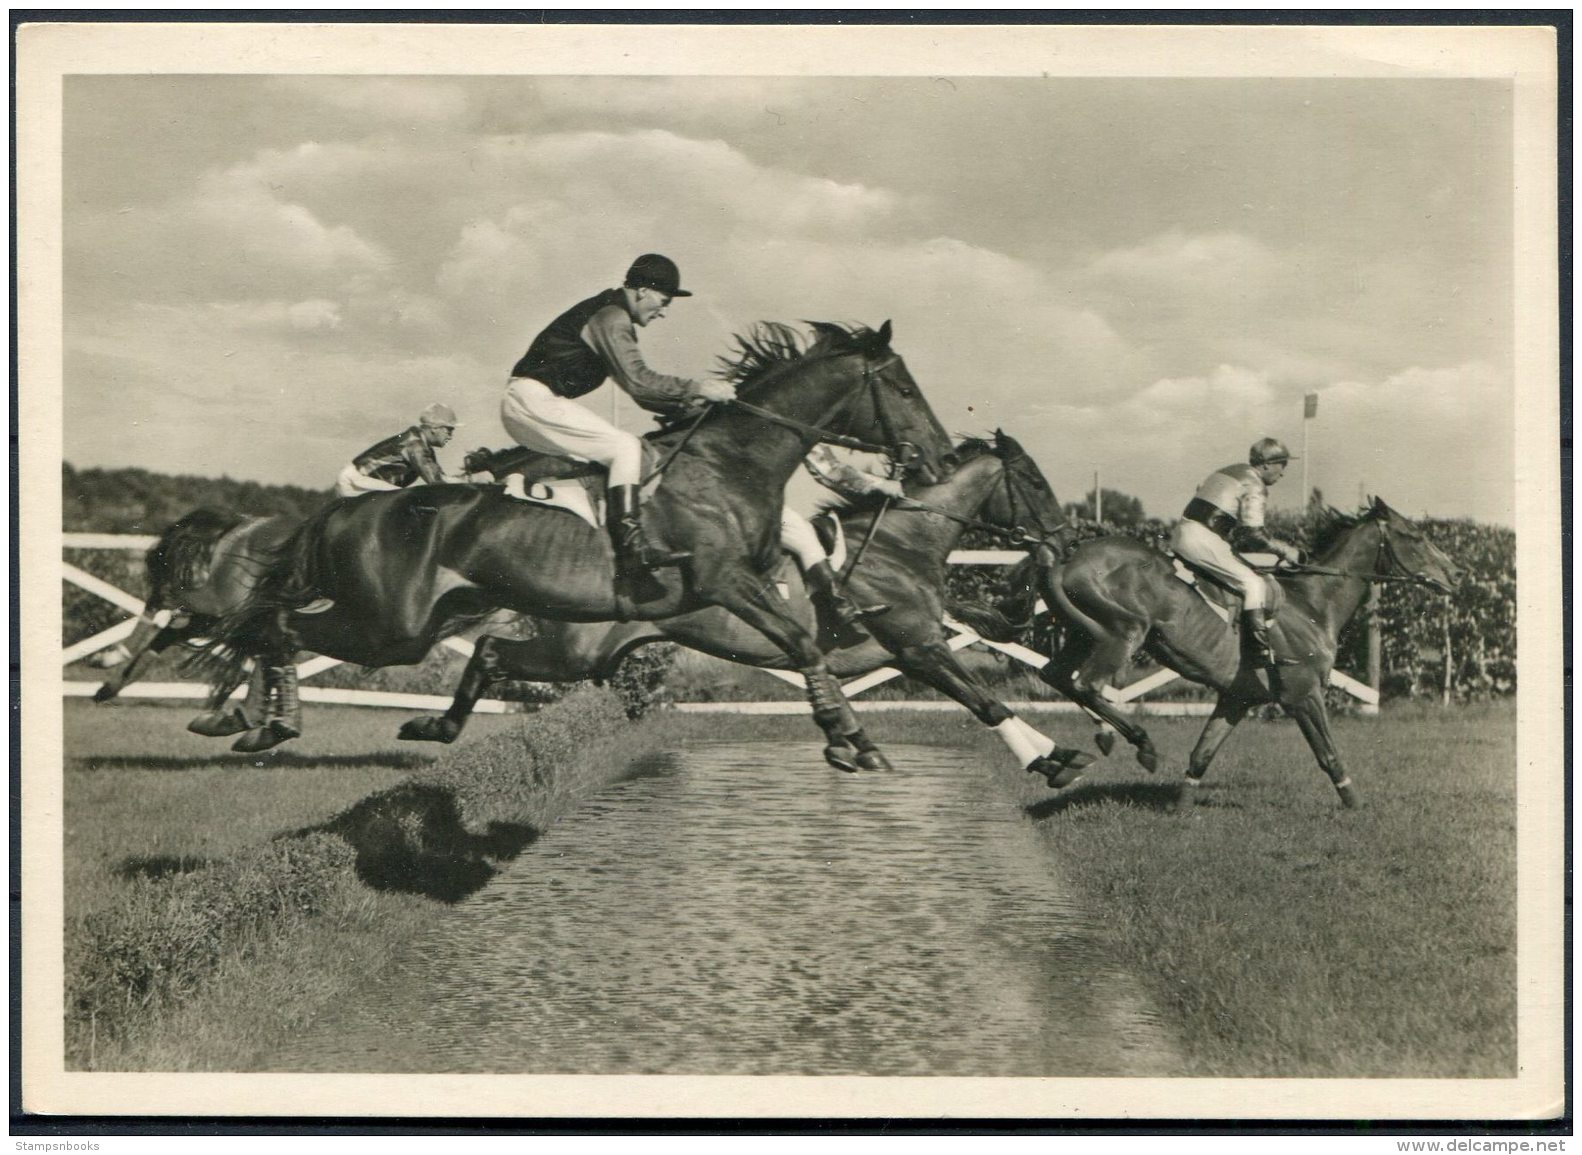 Germany Horse Racing Postcard - Horse Show